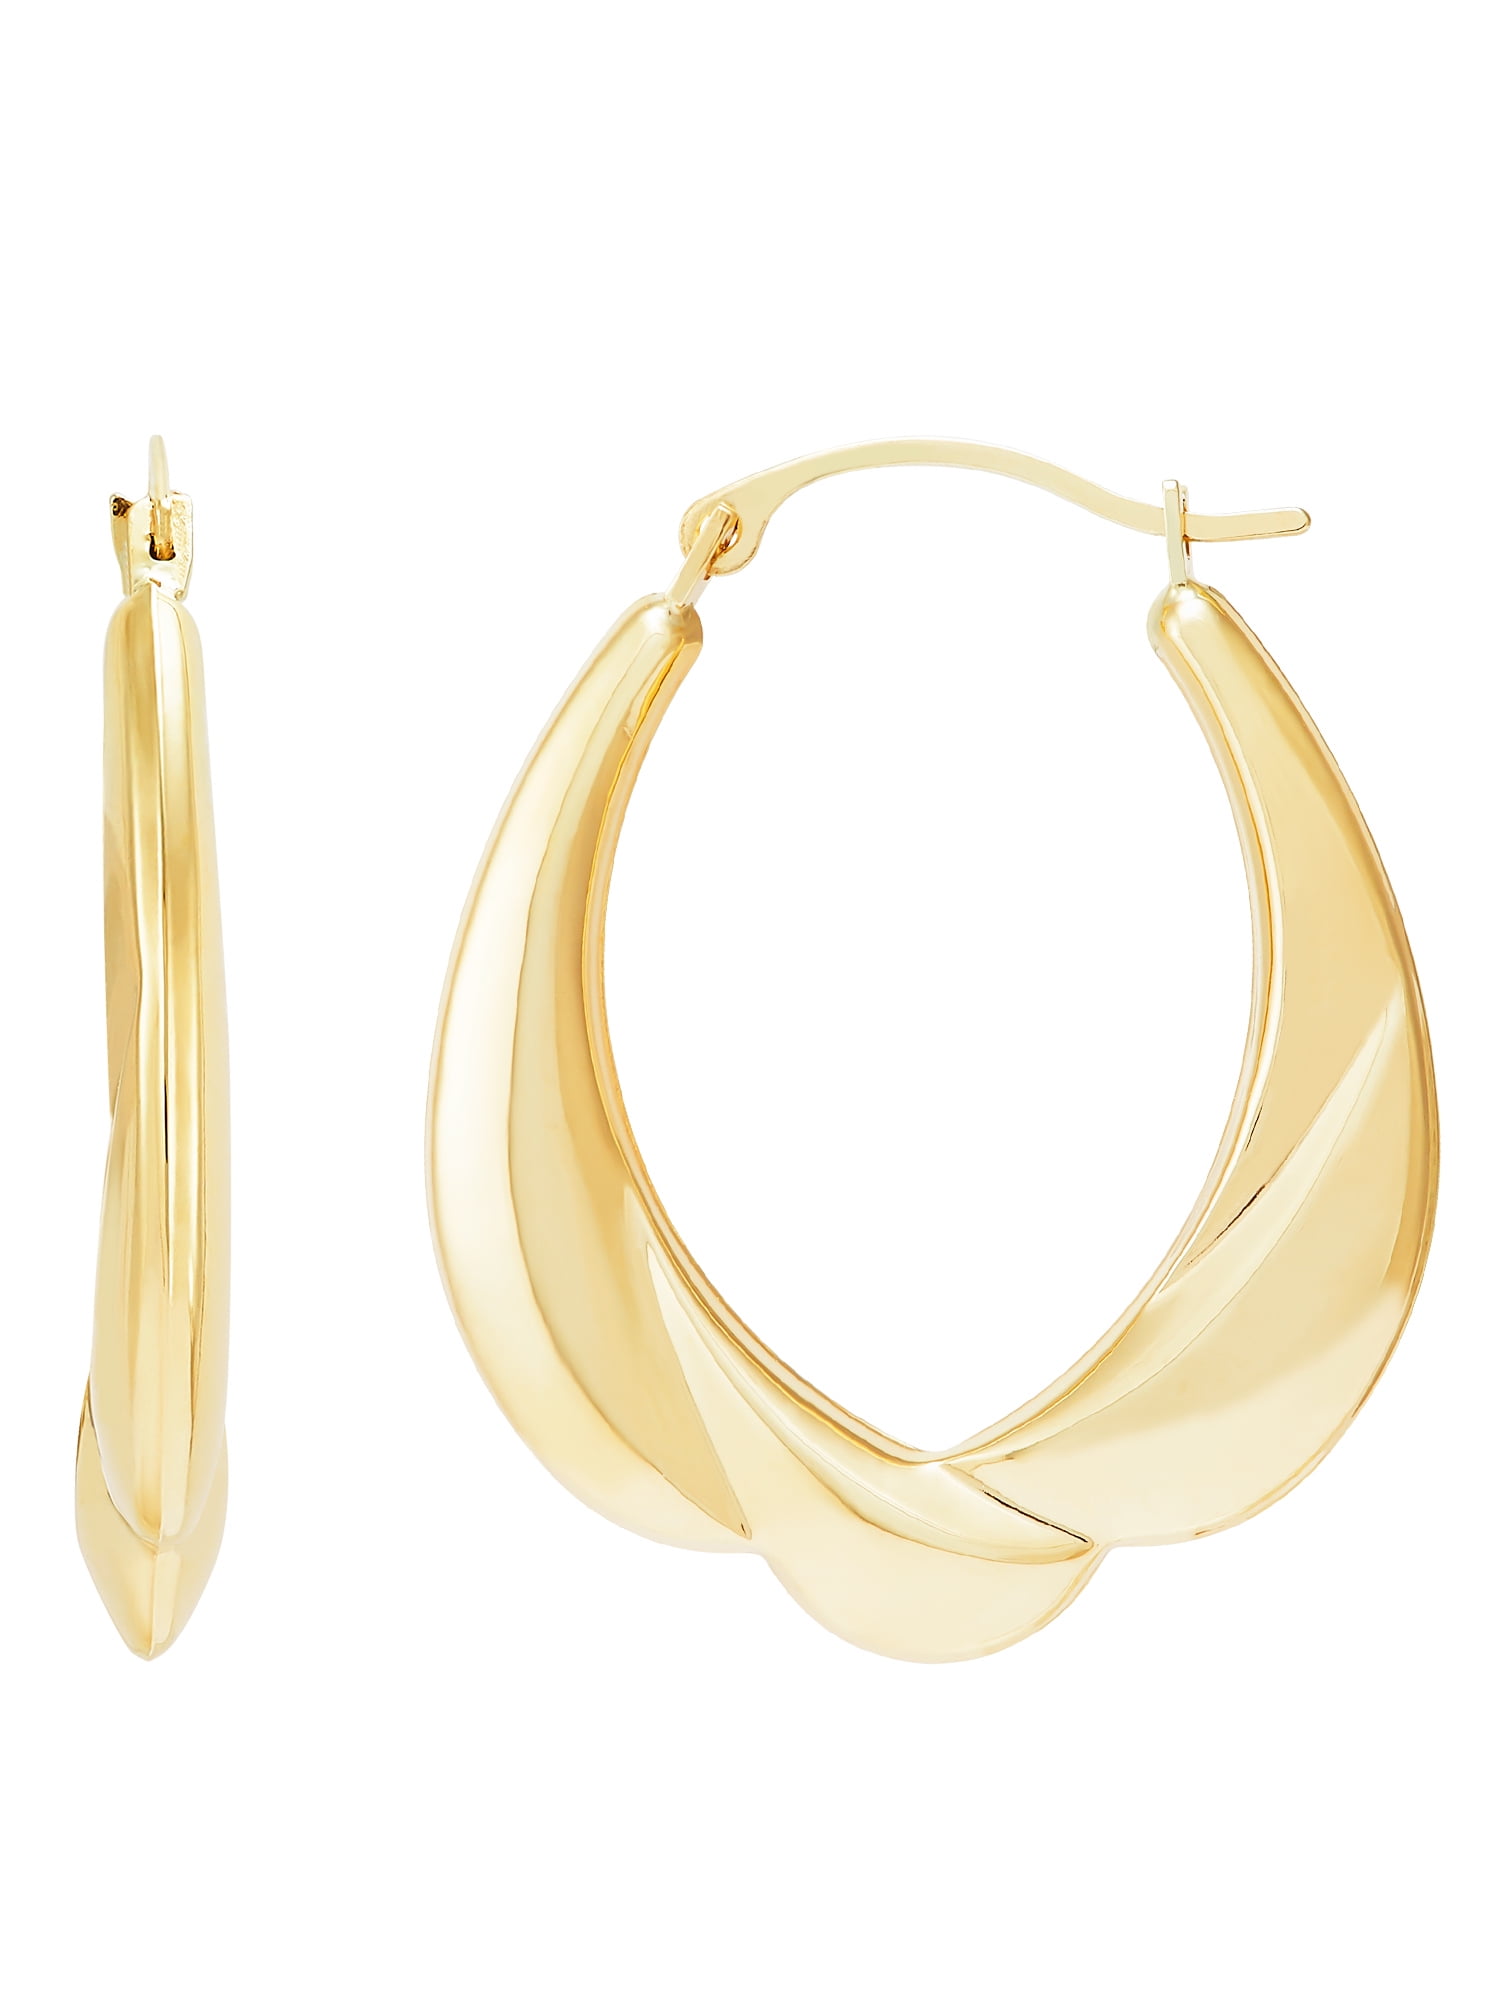 10K Yellow Gold Scalloped and Textured Hoop Earrings MSRP $68 